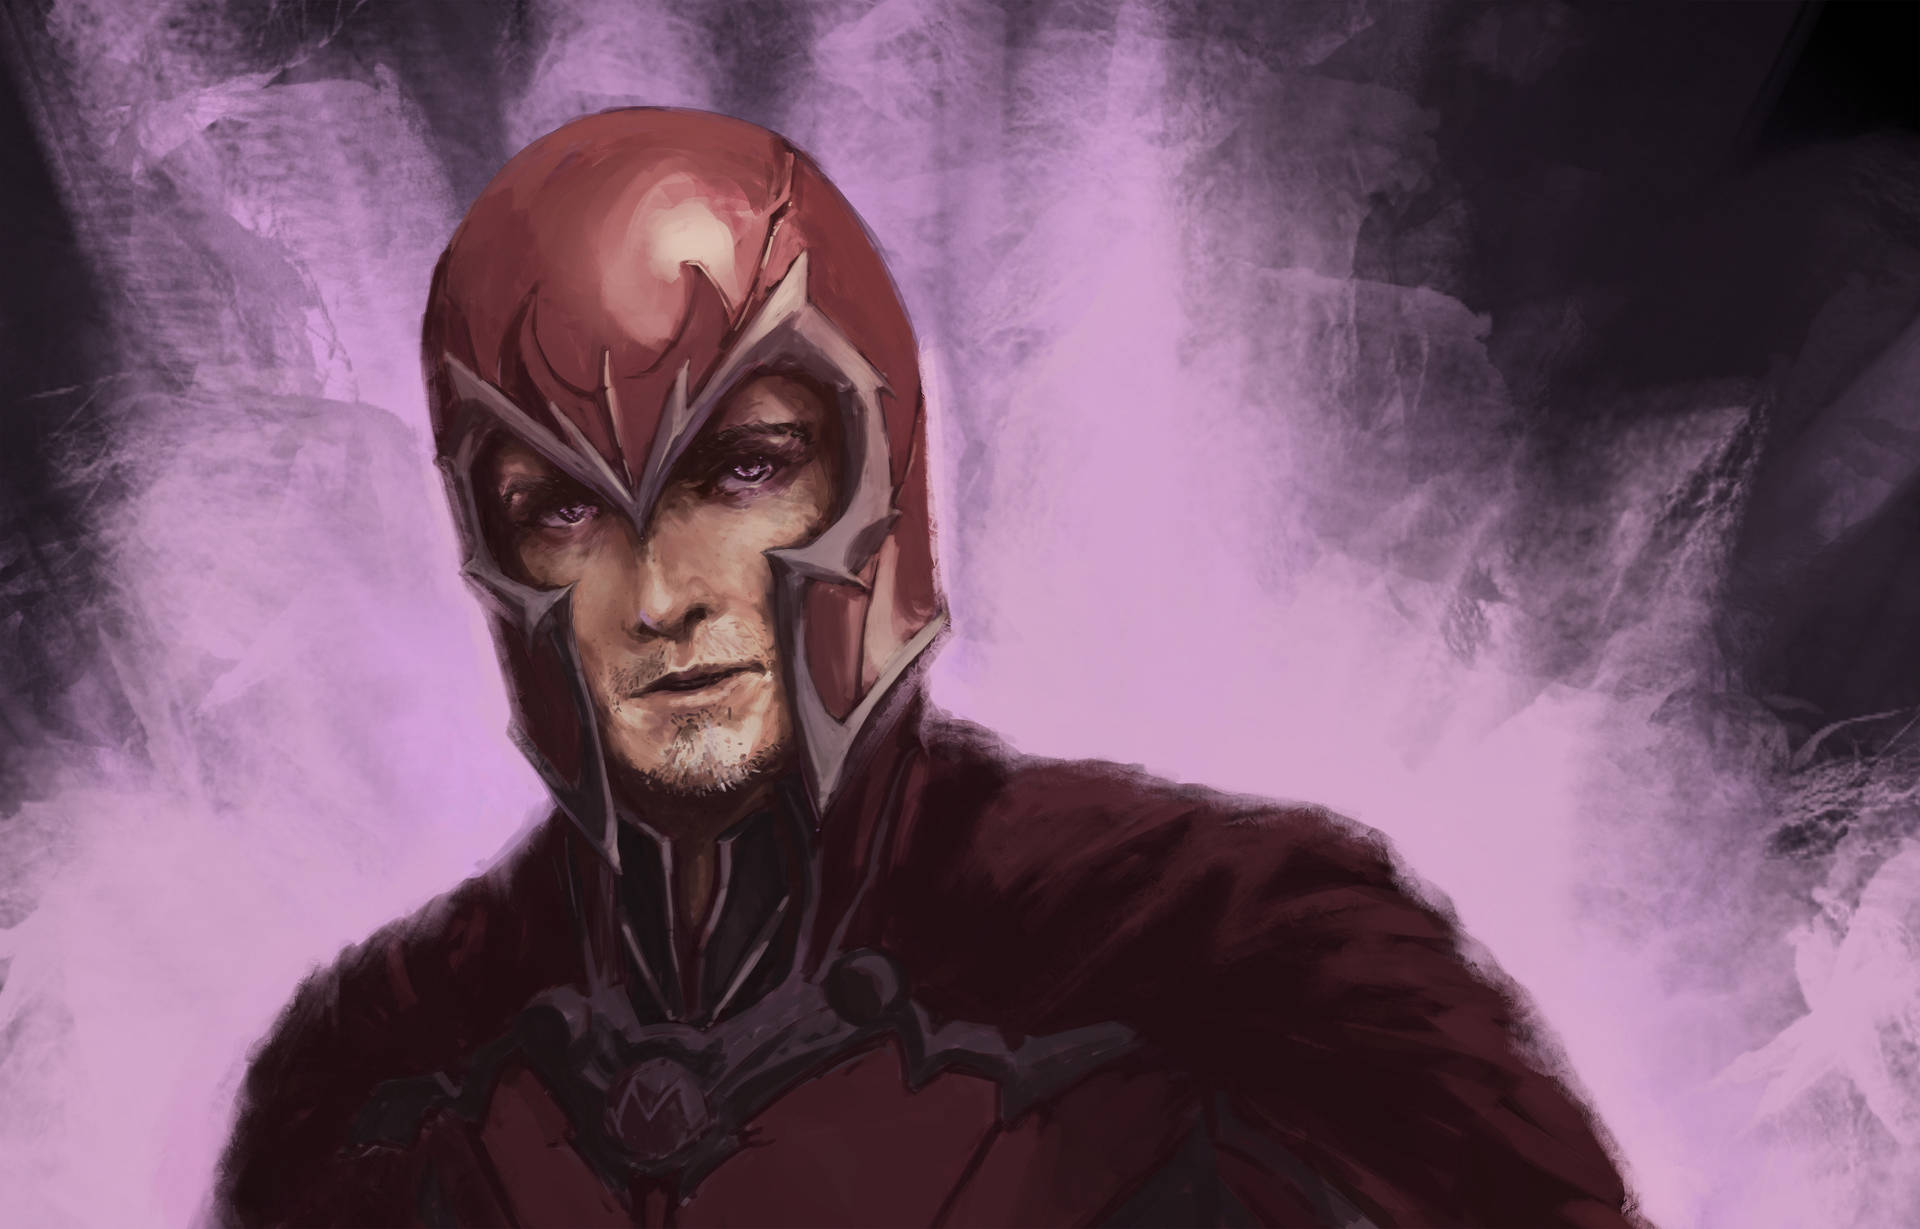 Good-looking Magneto Art Background